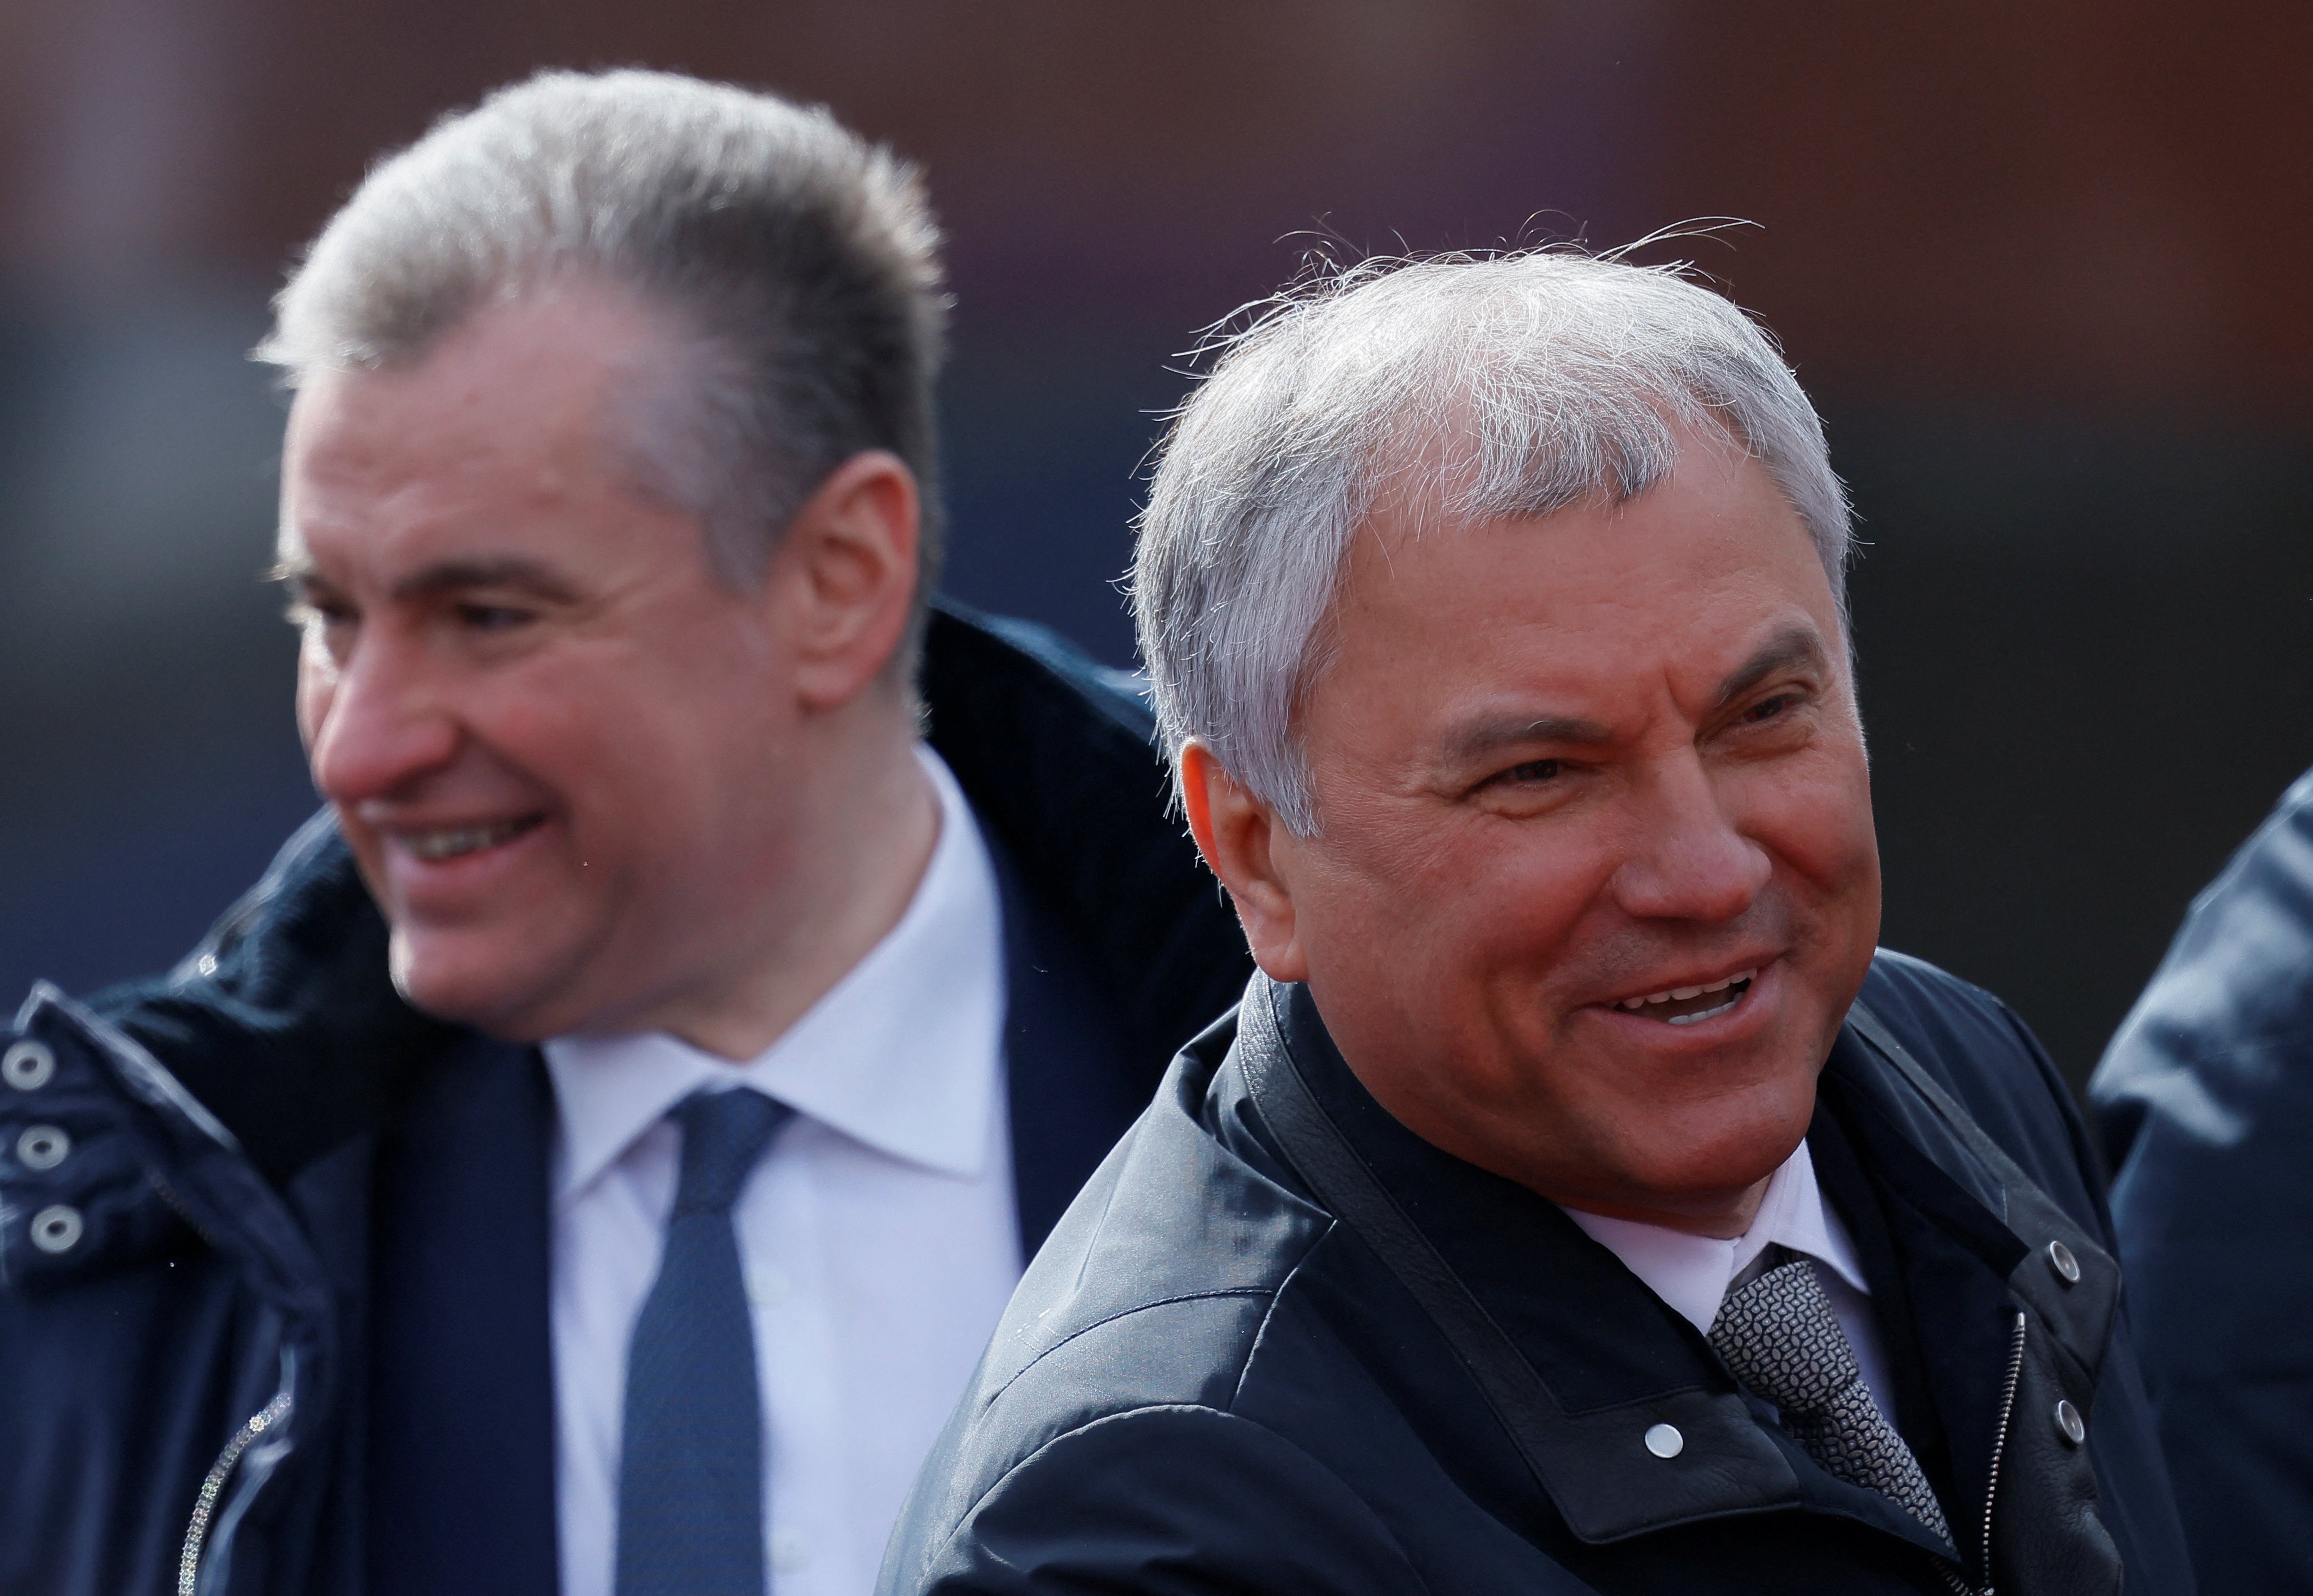 Speaker of Russia’s State Duma lower house of parliament Vyacheslav Volodin (R) and Leonid Slutsky, leader of the Liberal Democratic Party of Russia (LDPR), attend a military parade on Victory Day,